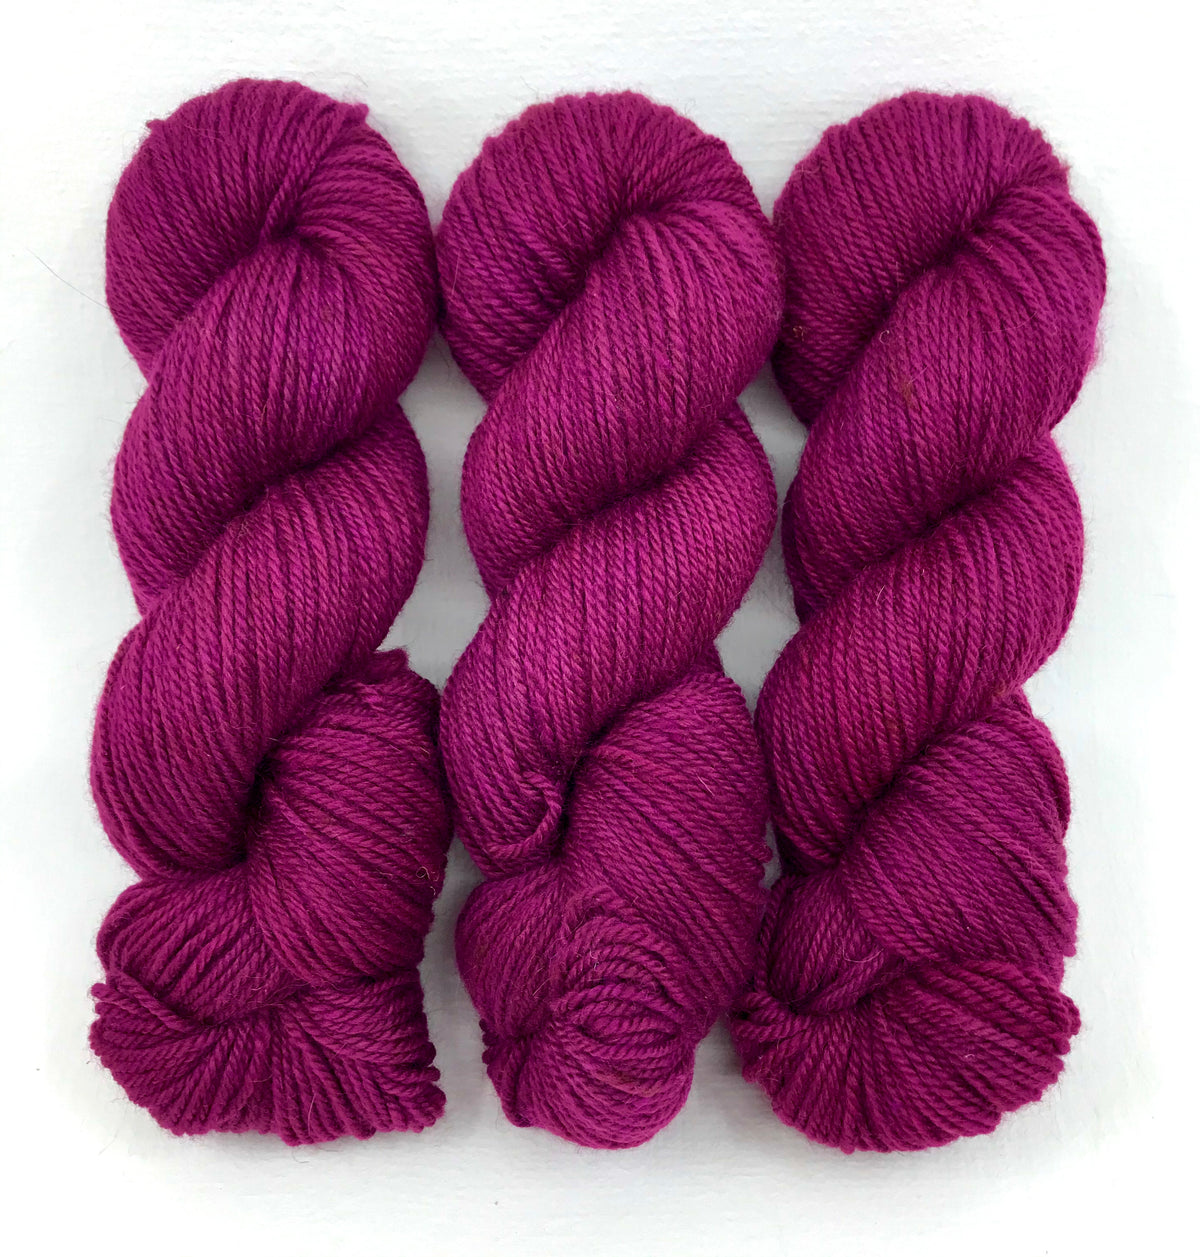 Berrylicious-Lascaux Worsted - Dyed Stock